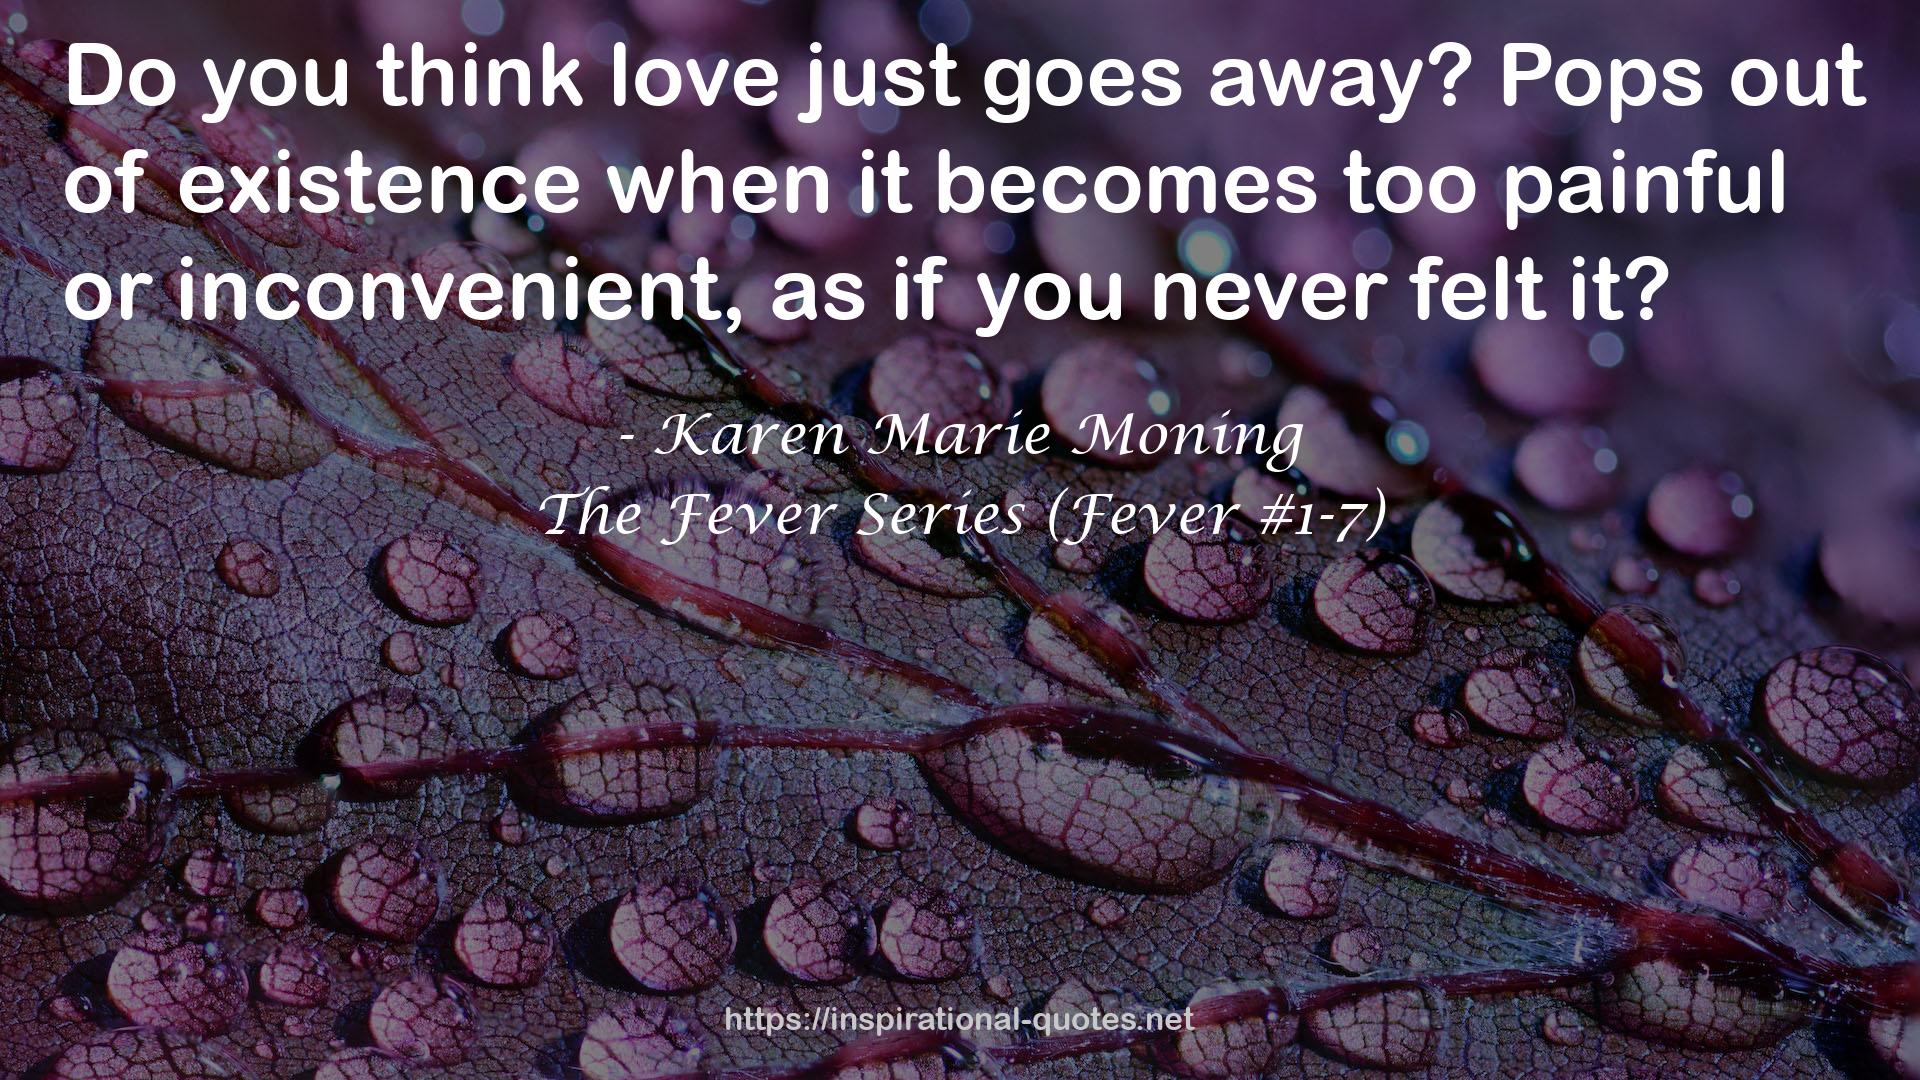 The Fever Series (Fever #1-7) QUOTES